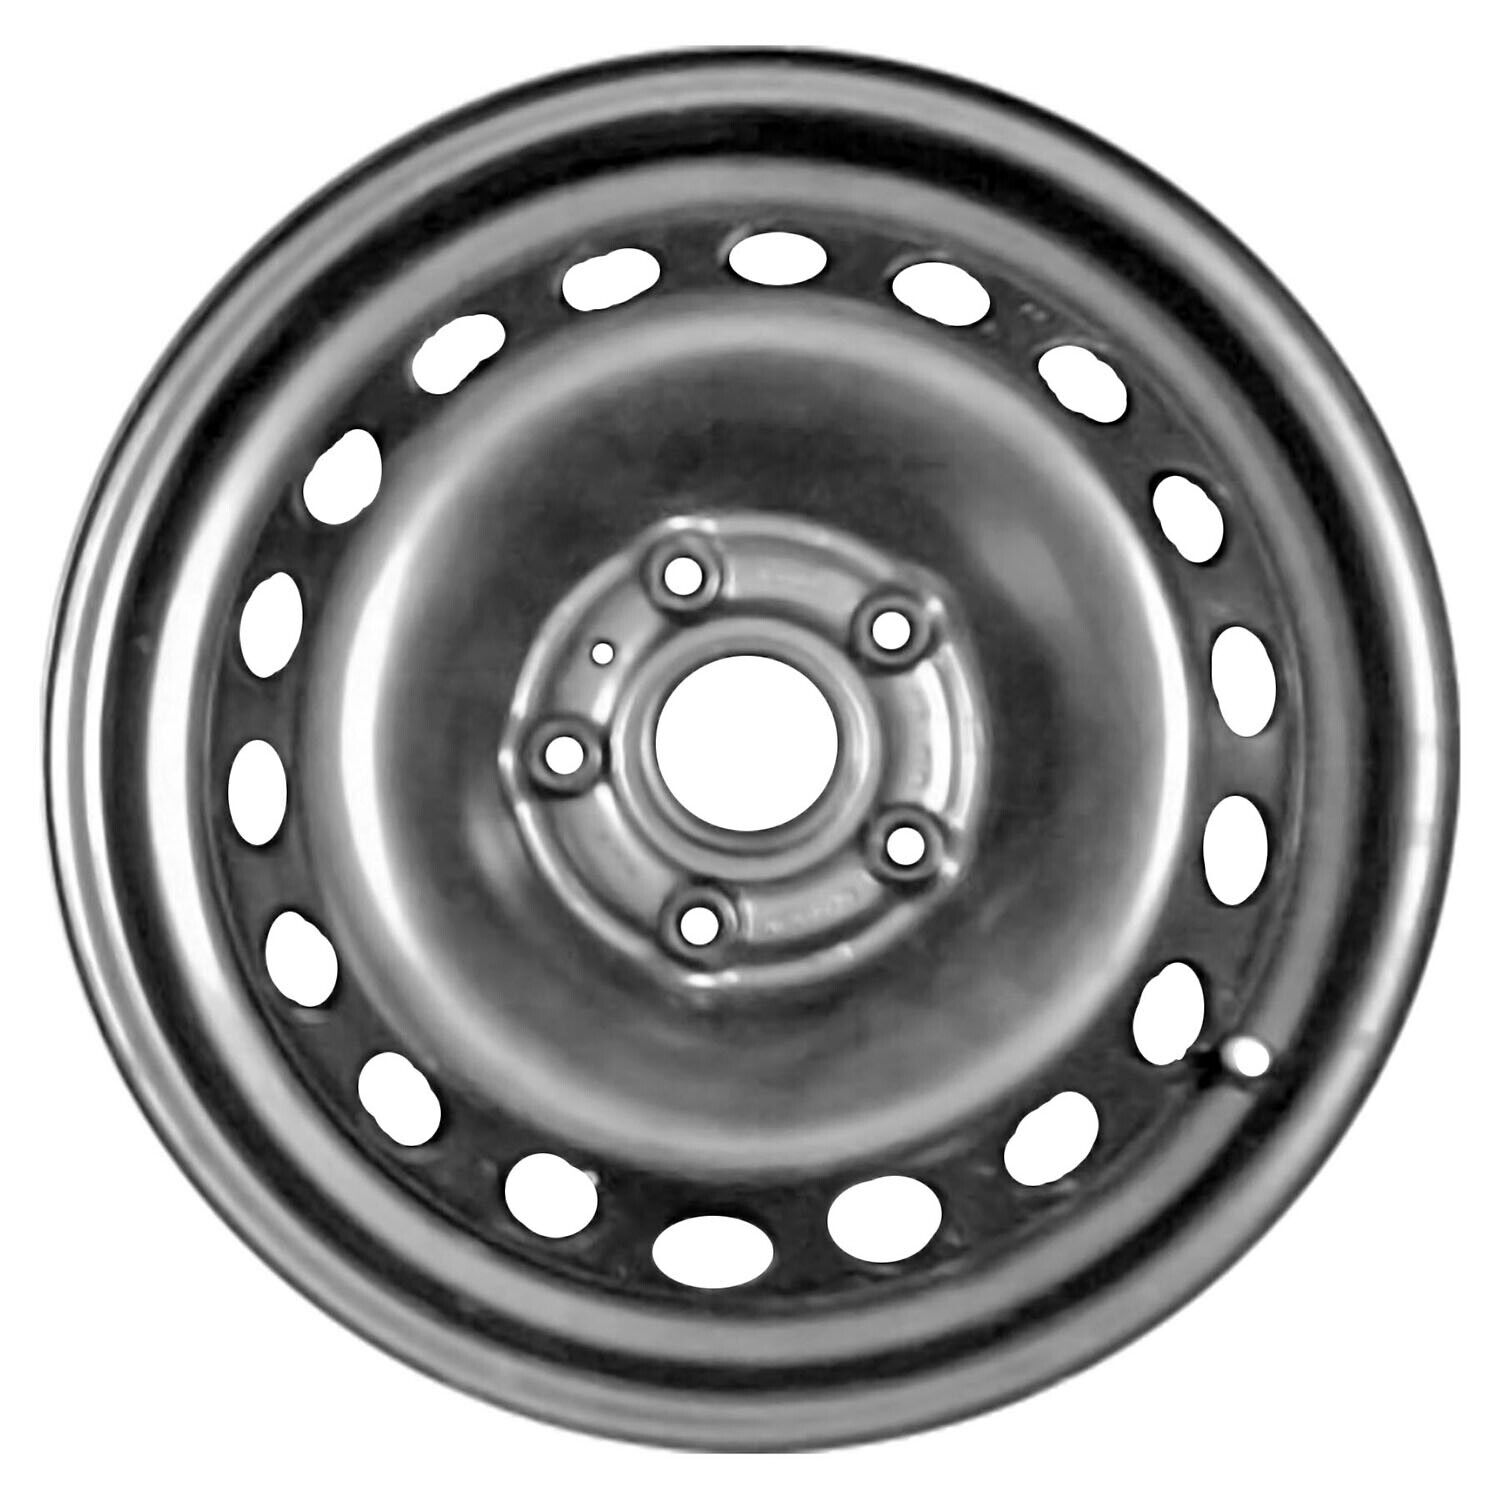 Reconditioned 15x6 Painted Black Wheel fits 560-69893